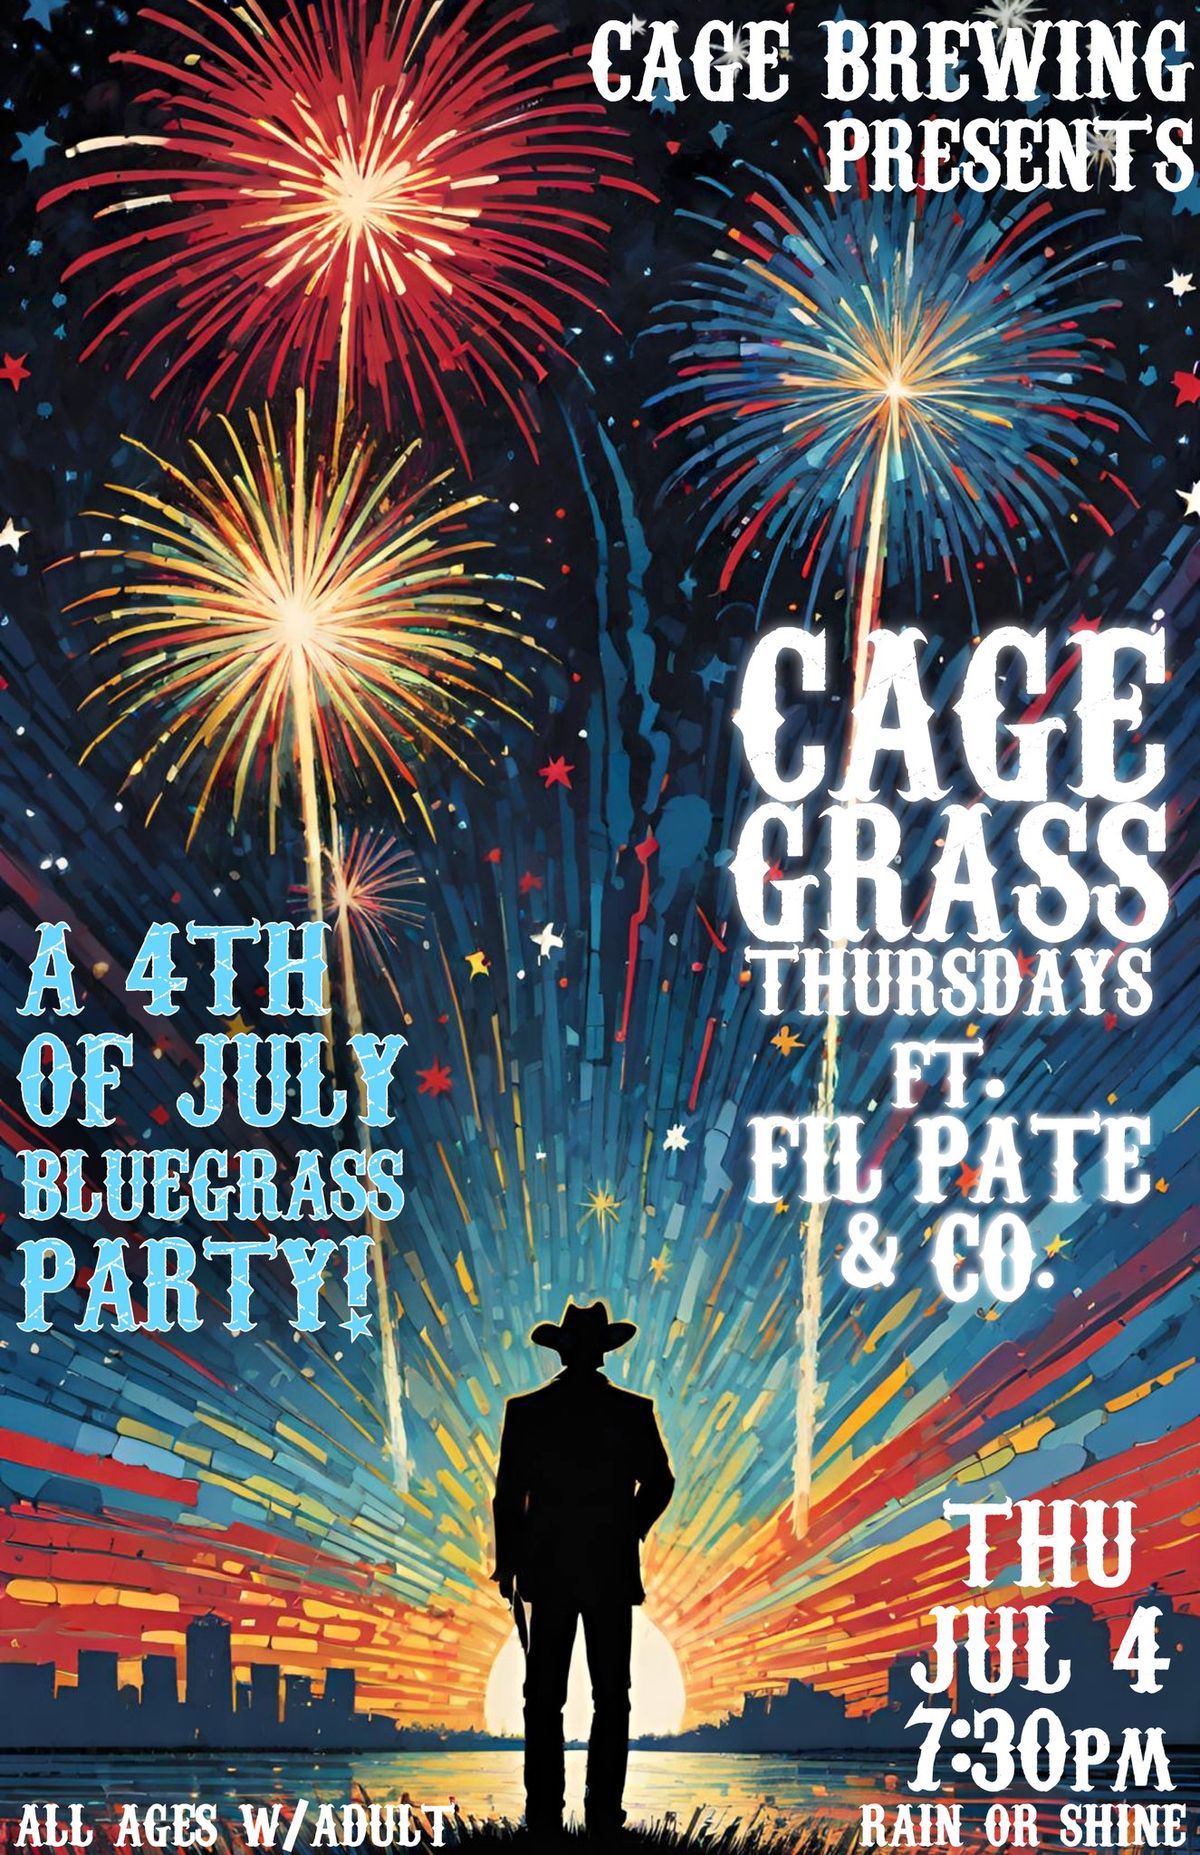 4th of July PARTY ft. Fil Pate & Co. | LIVE BLUEGRASS NIGHT | Cage Brewing, St. Pete, FL | FREE